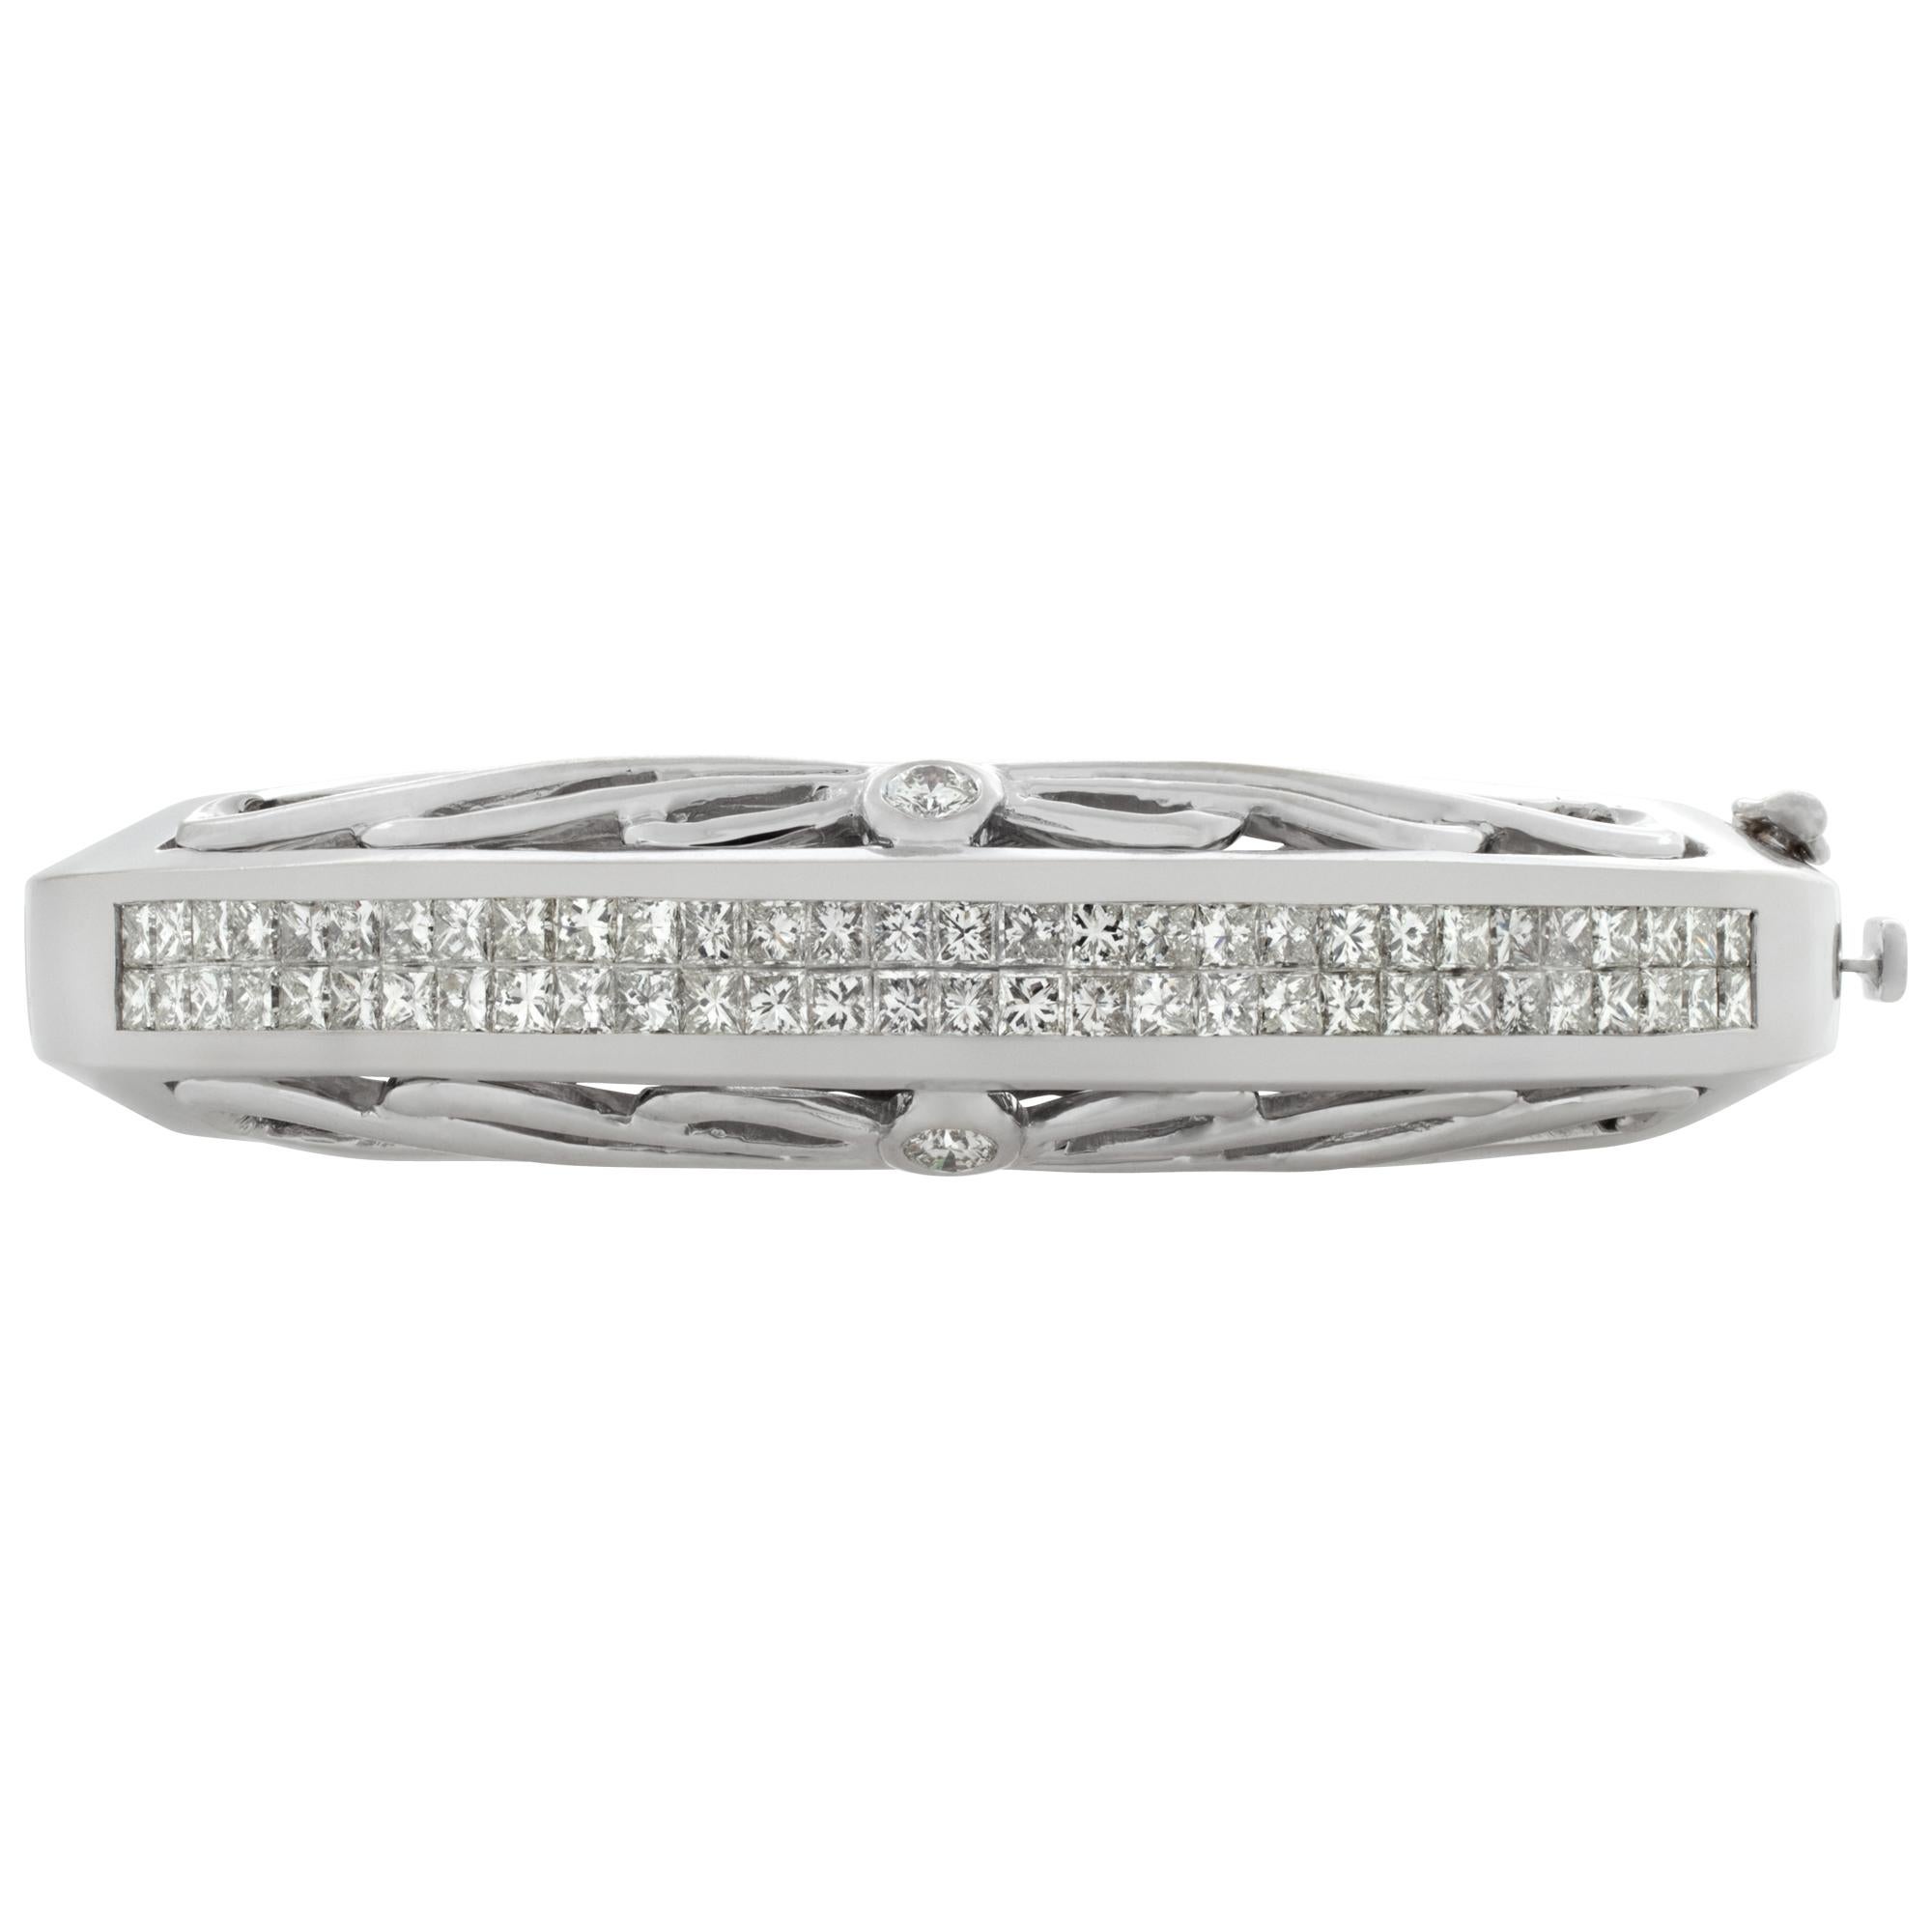 Diamond bangle in 18k white gold with over 3 carats in H color, VS clarity princess cut diamonds. Fits wrist up to 7.5'', width tapers from 13mm x 5mm.
